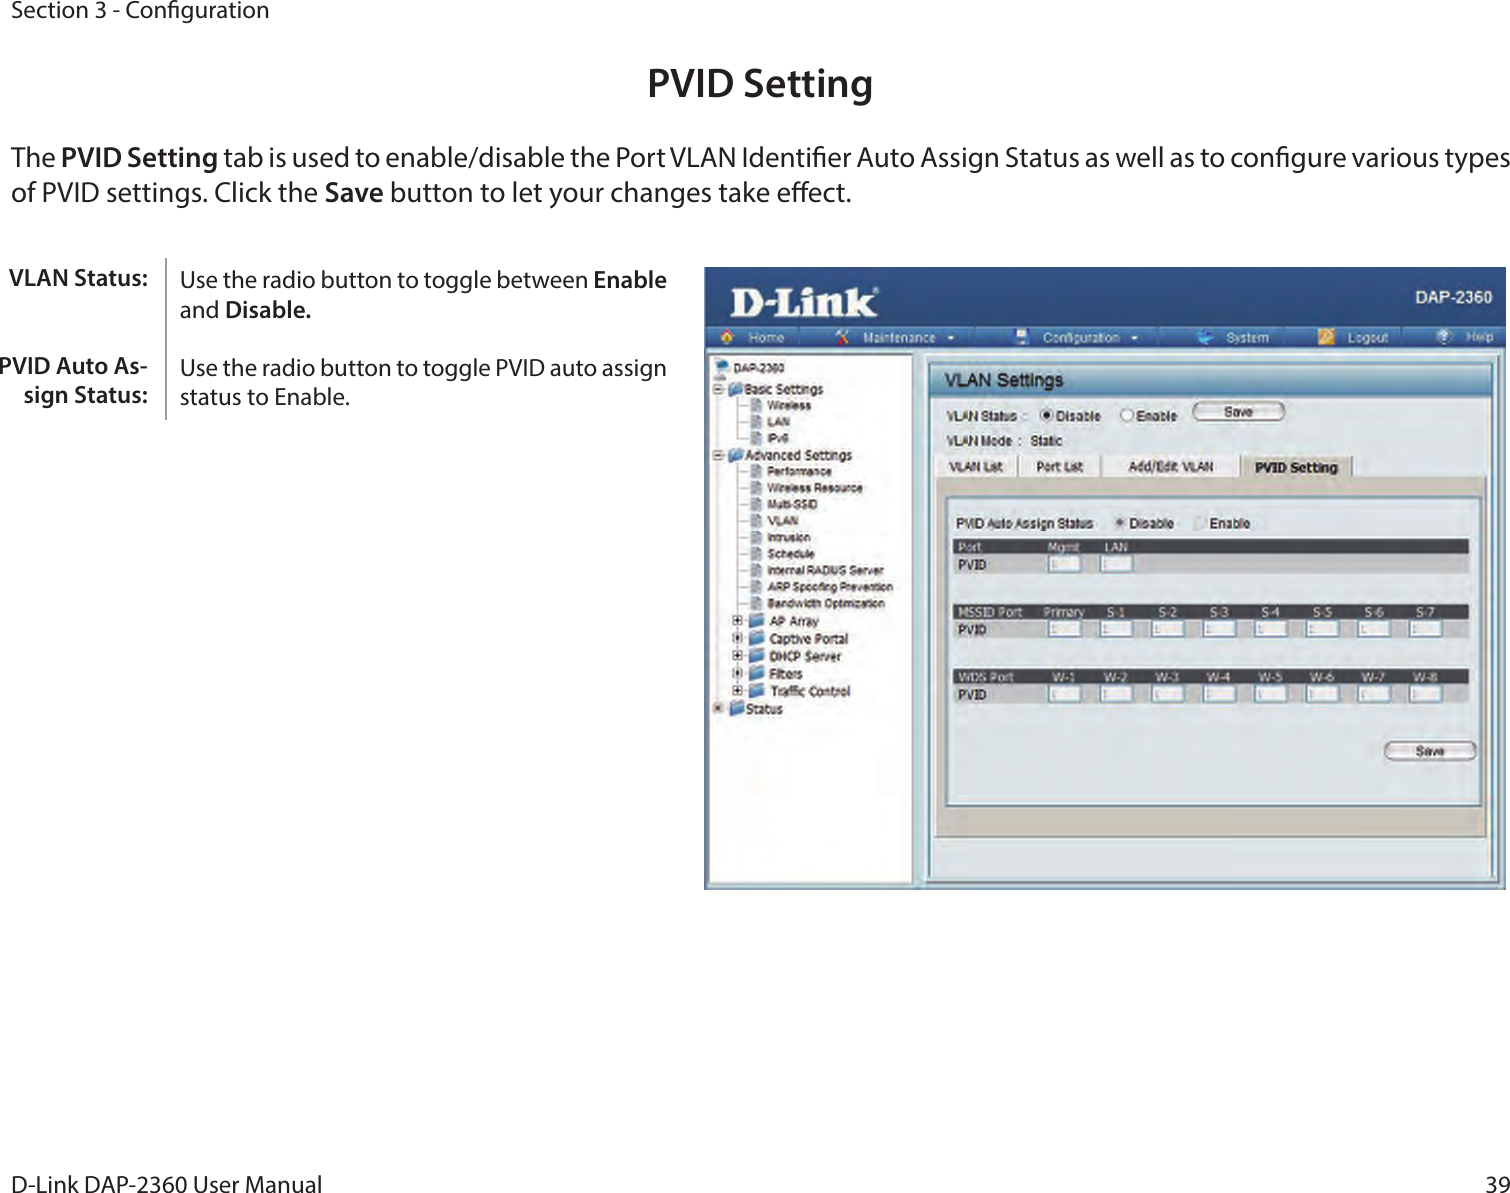 39D-Link DAP-2360 User ManualSection 3 - CongurationPVID SettingThe PVID Setting tab is used to enable/disable the Port VLAN Identier Auto Assign Status as well as to congure various types of PVID settings. Click the Save button to let your changes take eect.Use the radio button to toggle between Enable and Disable. Use the radio button to toggle PVID auto assign status to Enable.VLAN Status:PVID Auto As-sign Status: